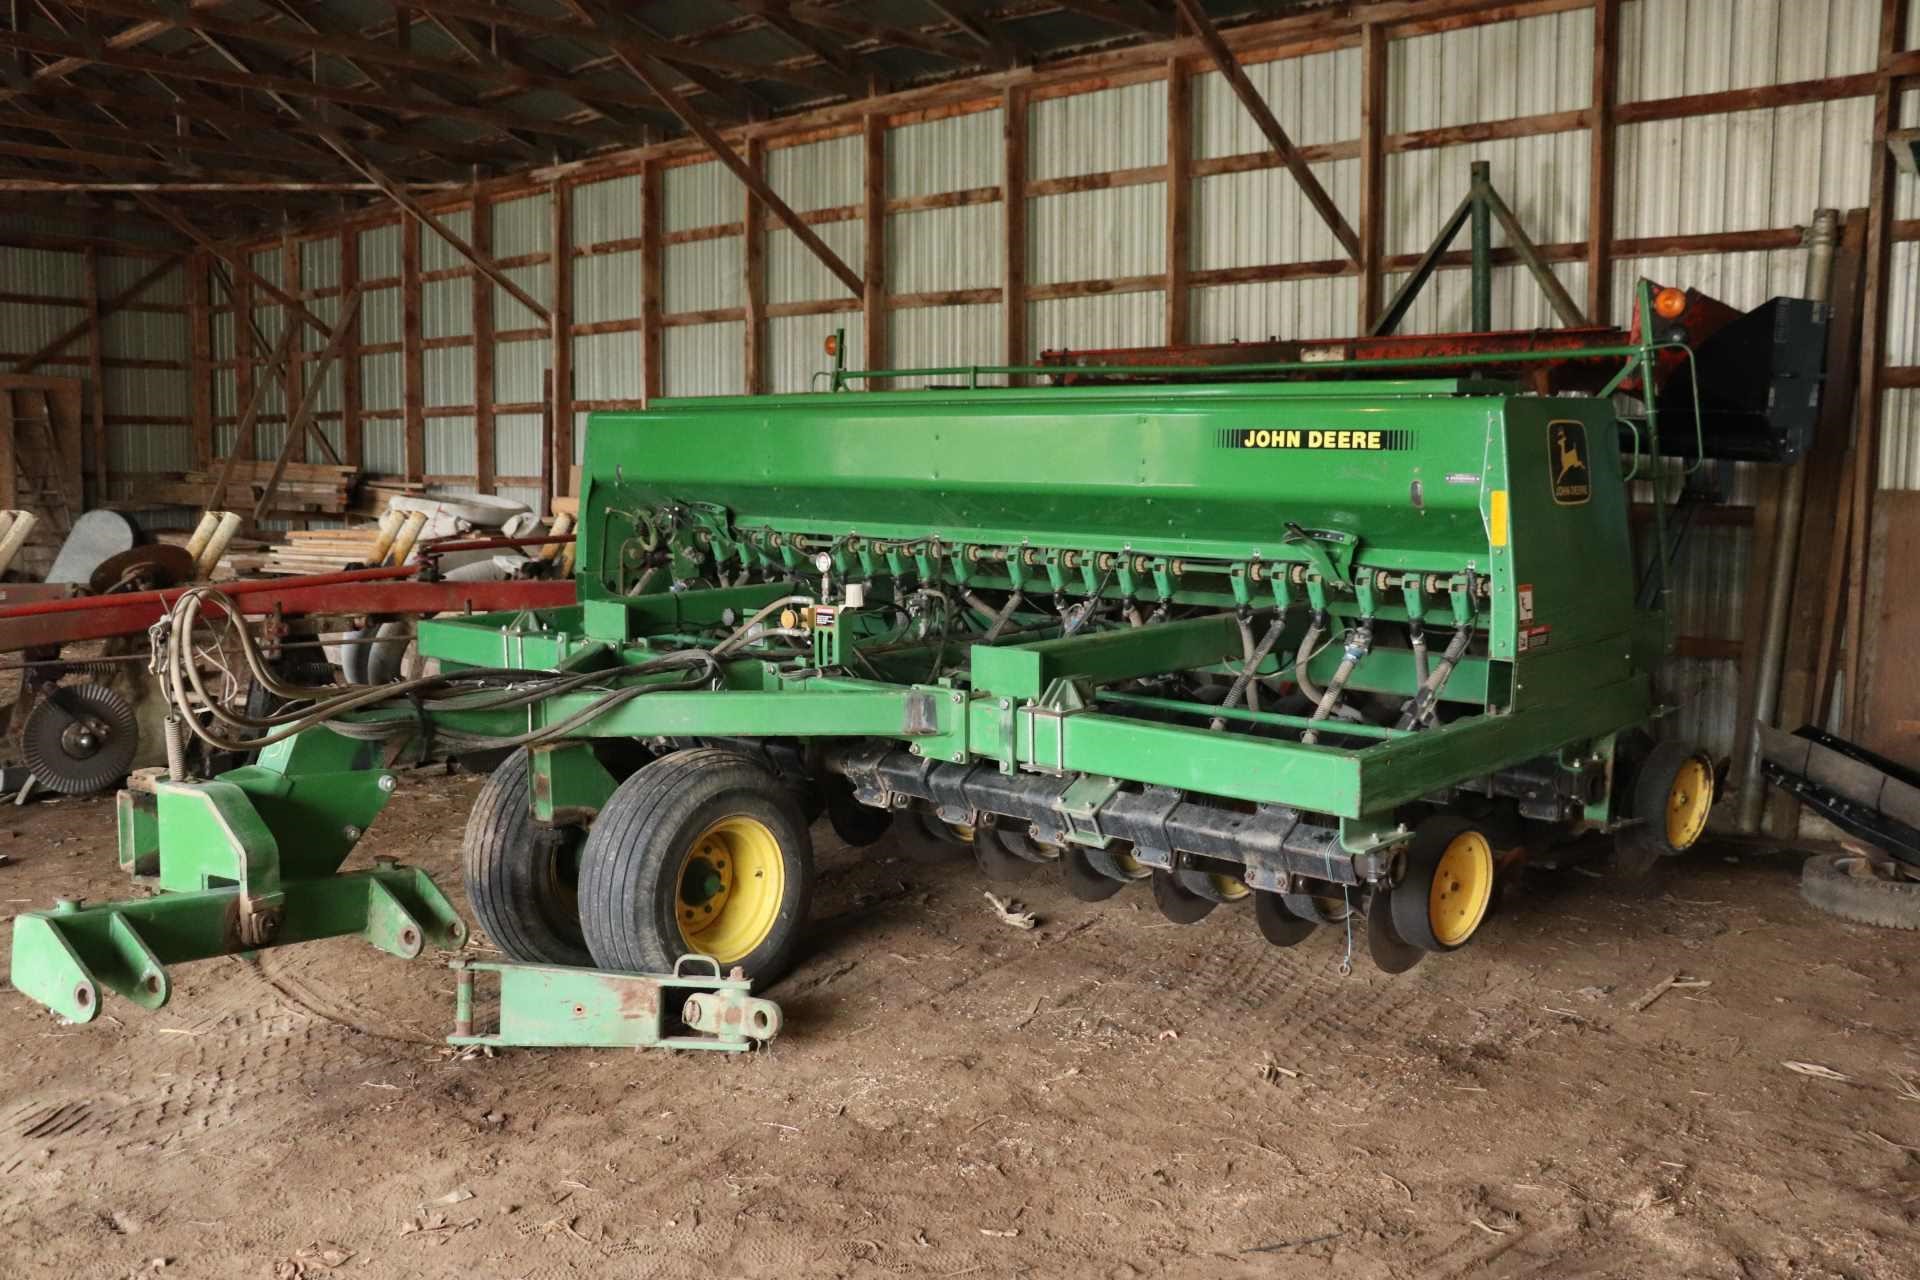 RAY MAR FARMS UNRESERVED AUCTION - MARCH 27TH @10AM